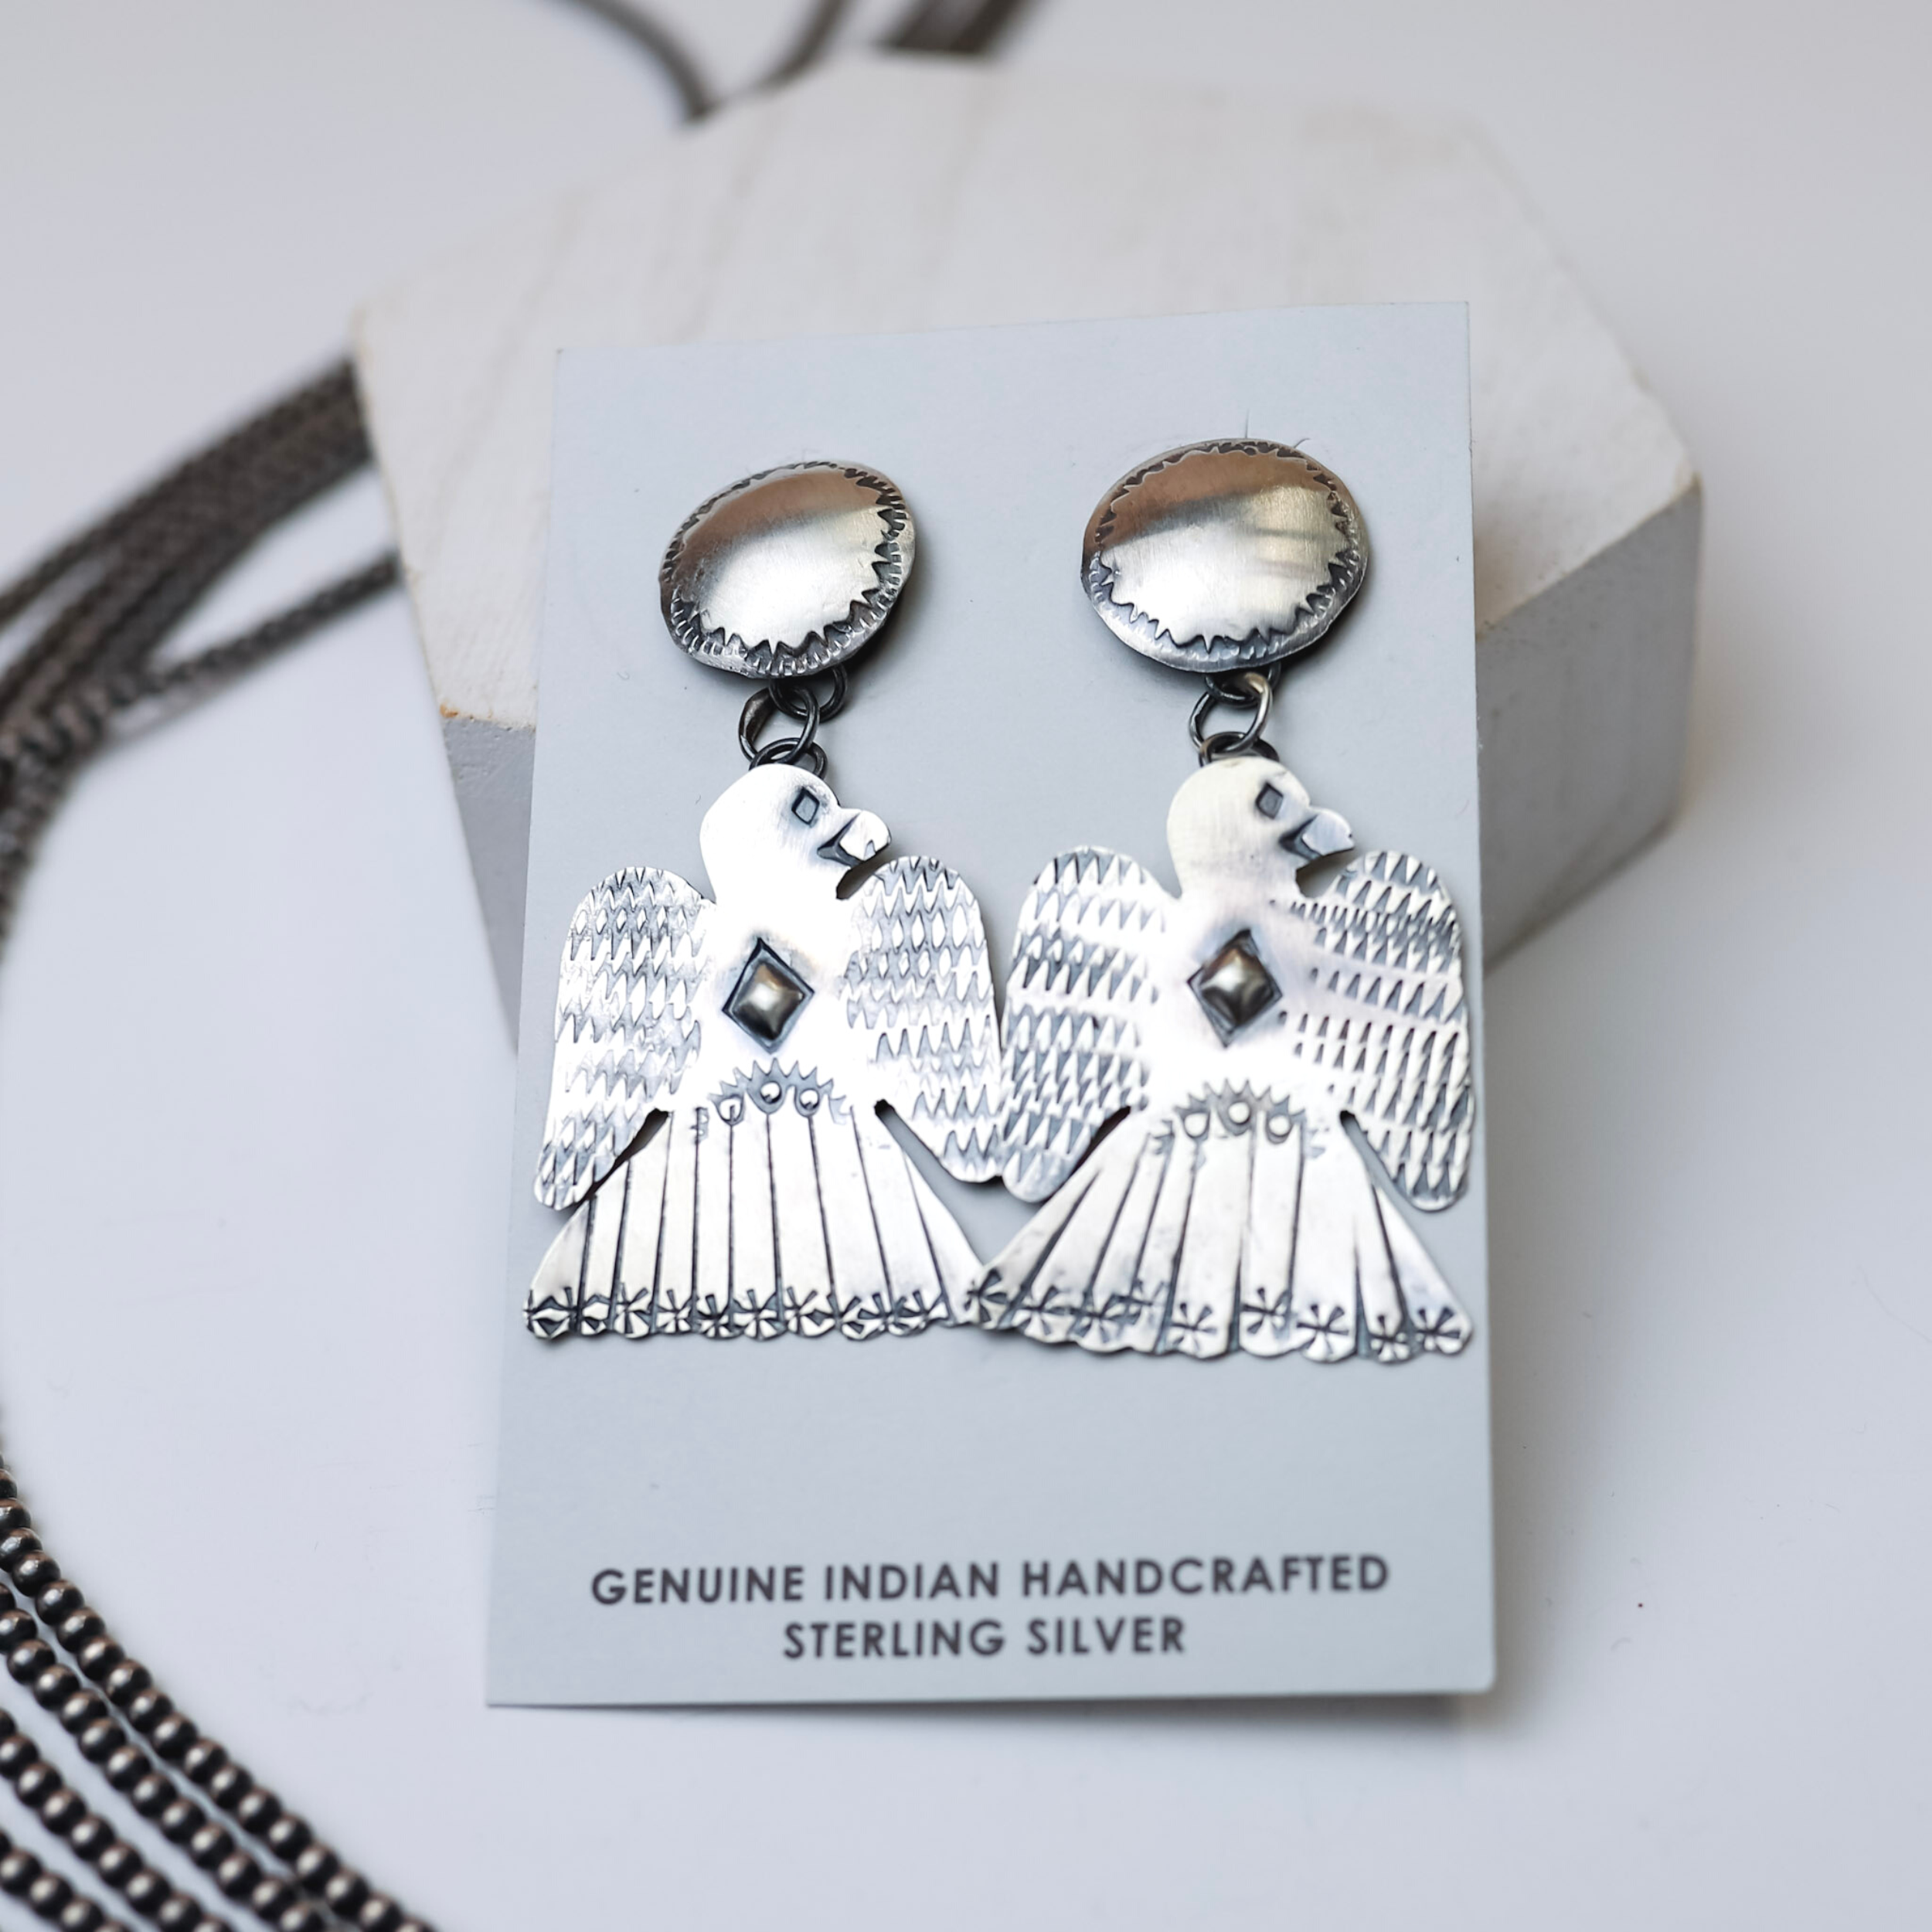 Tim Yazzie Navajo Handmade Sterling Silver Thunderbird Drop Earrings are centered in the picture with navajo pearls laid to the left of the earrings. All on a white background. 